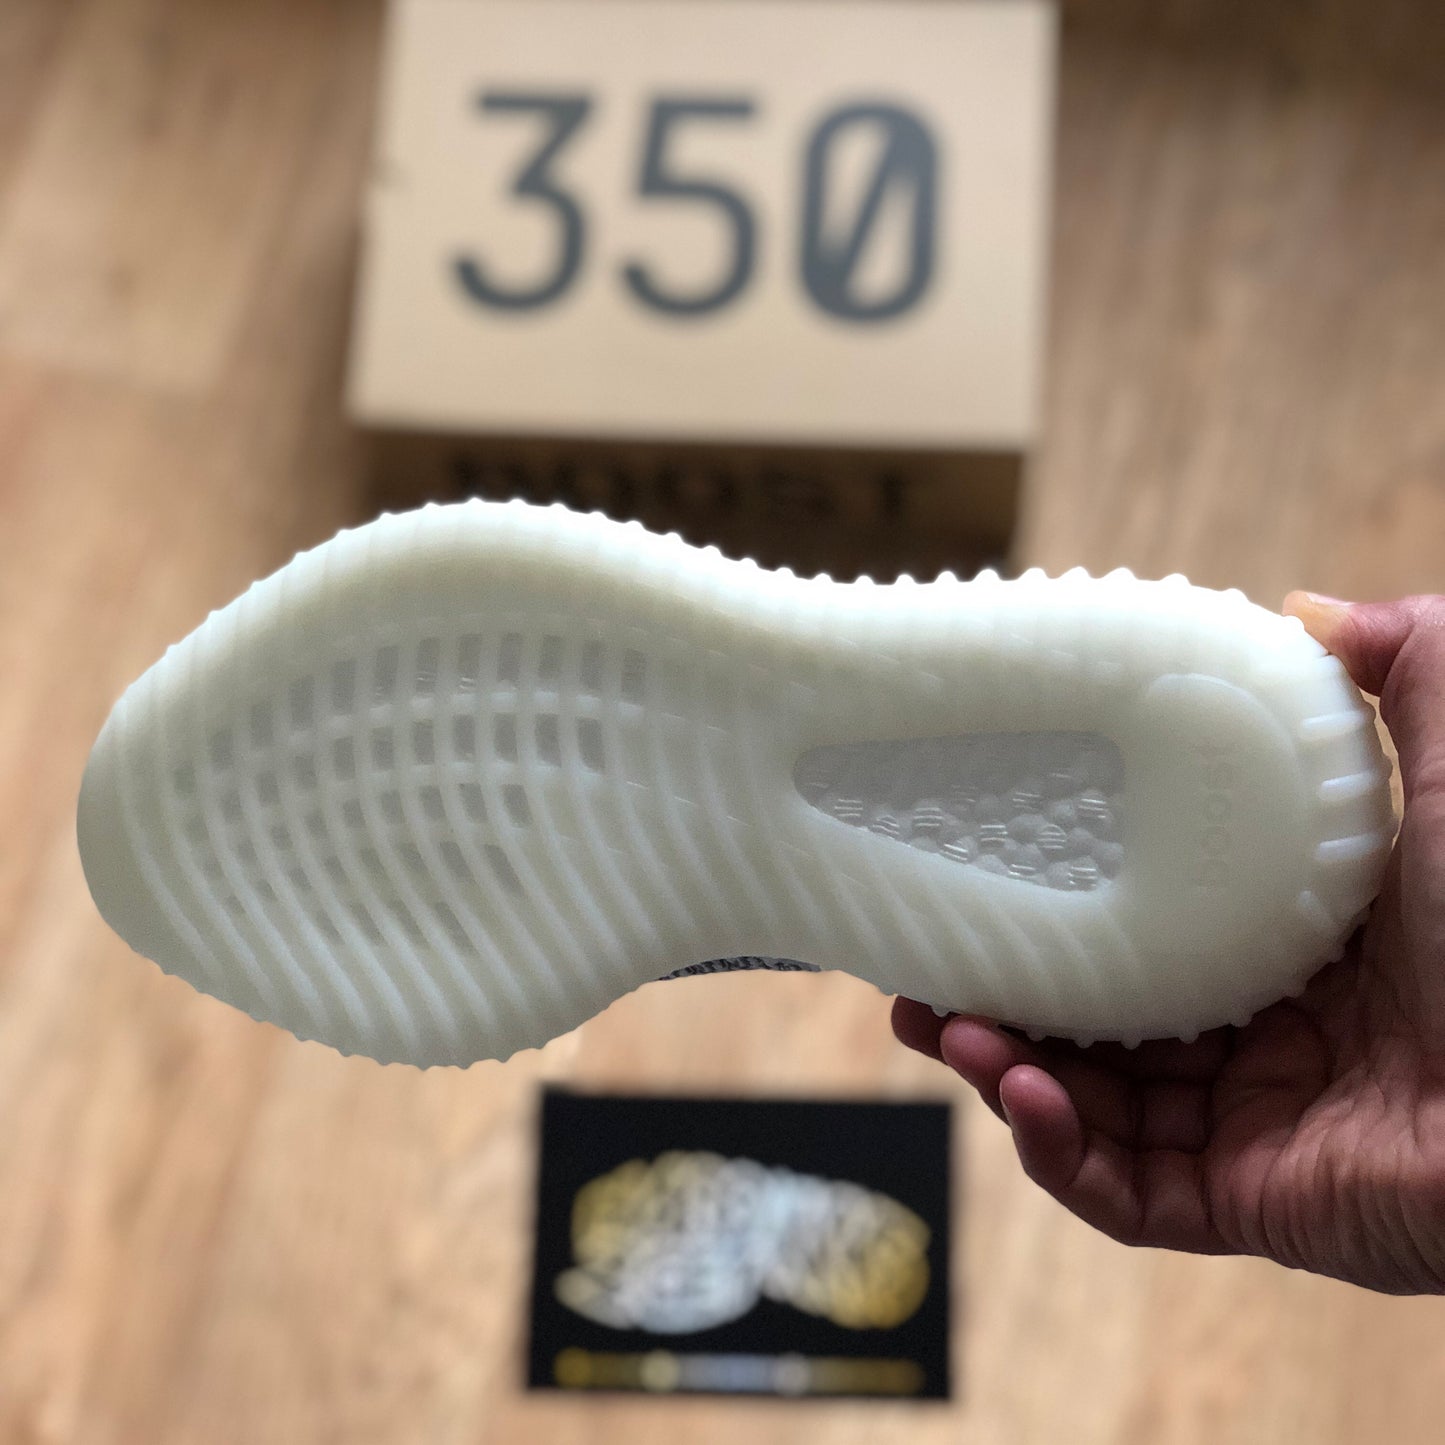 Yeezy Boost 350 V2 - Static (non reflective)